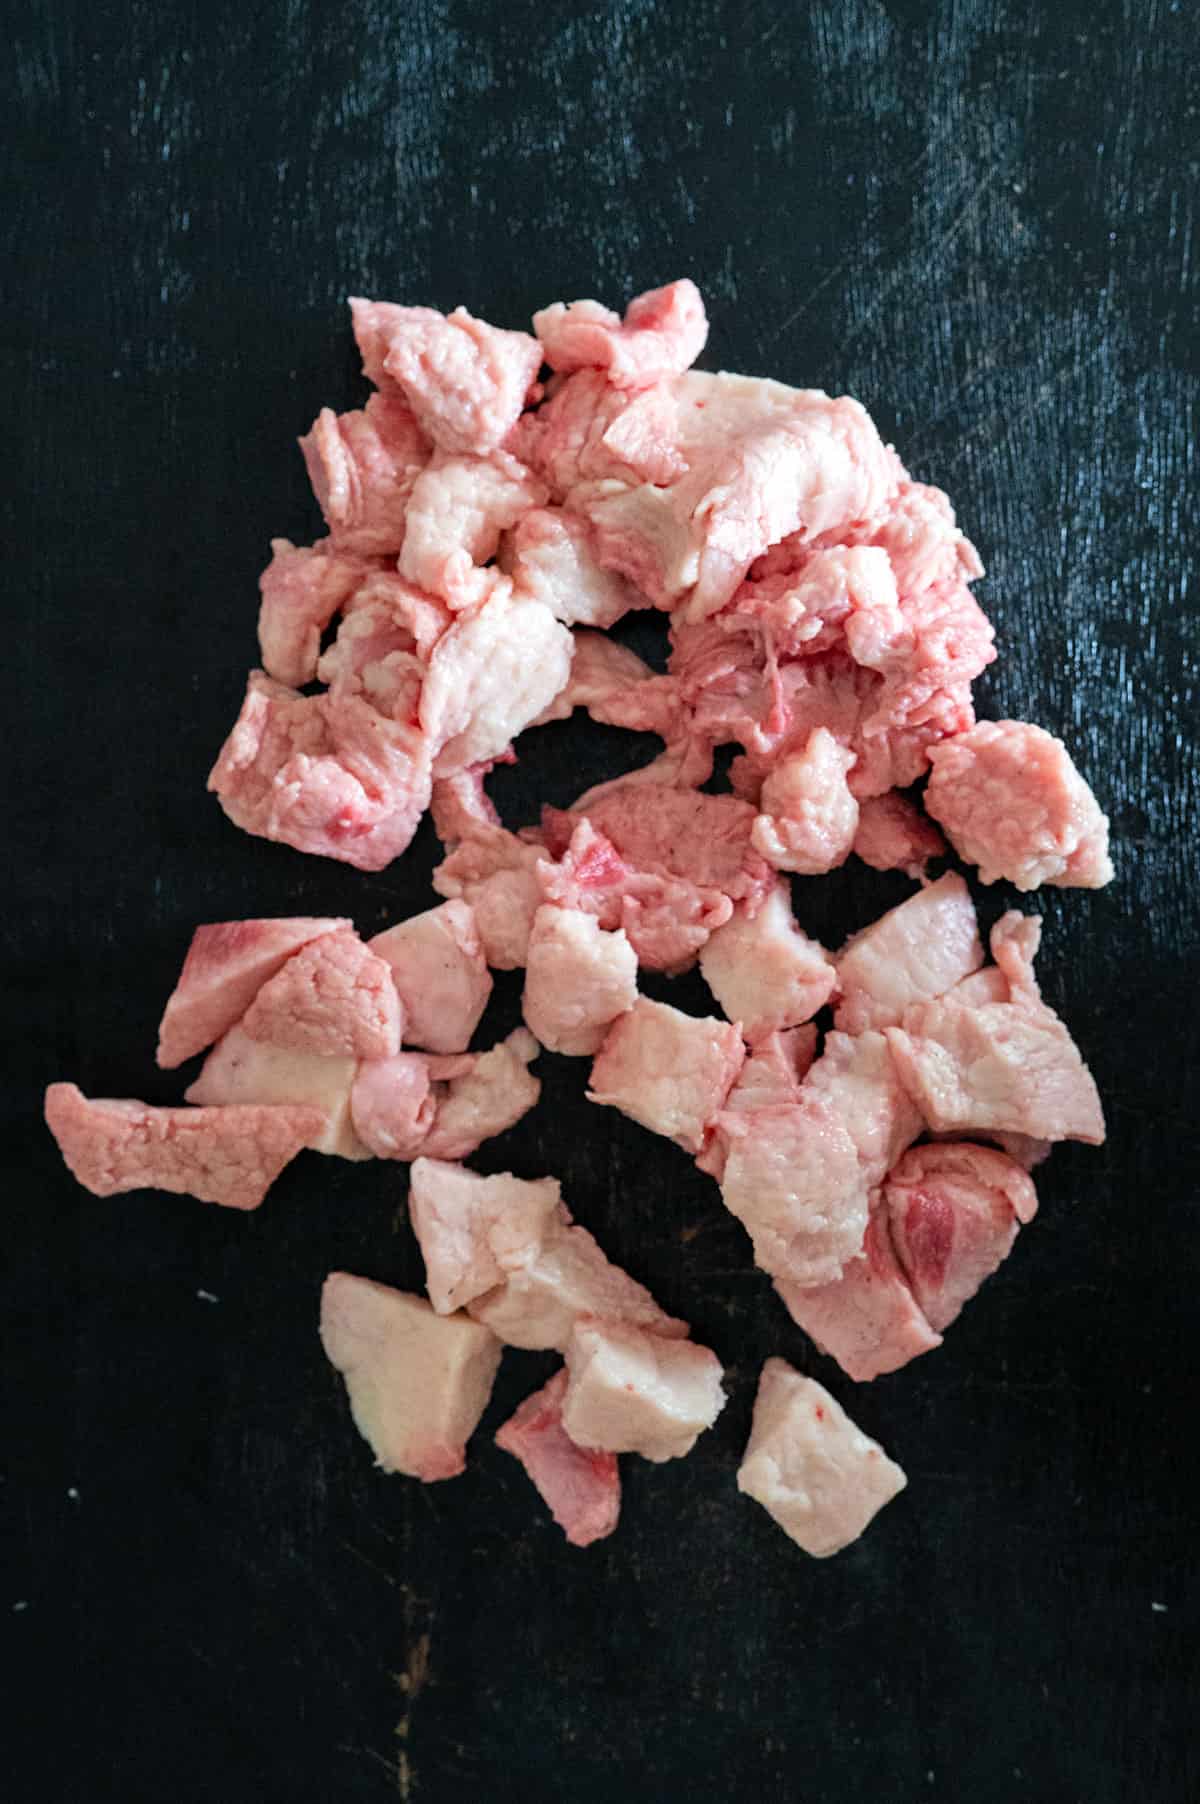 cubes of beef fat.